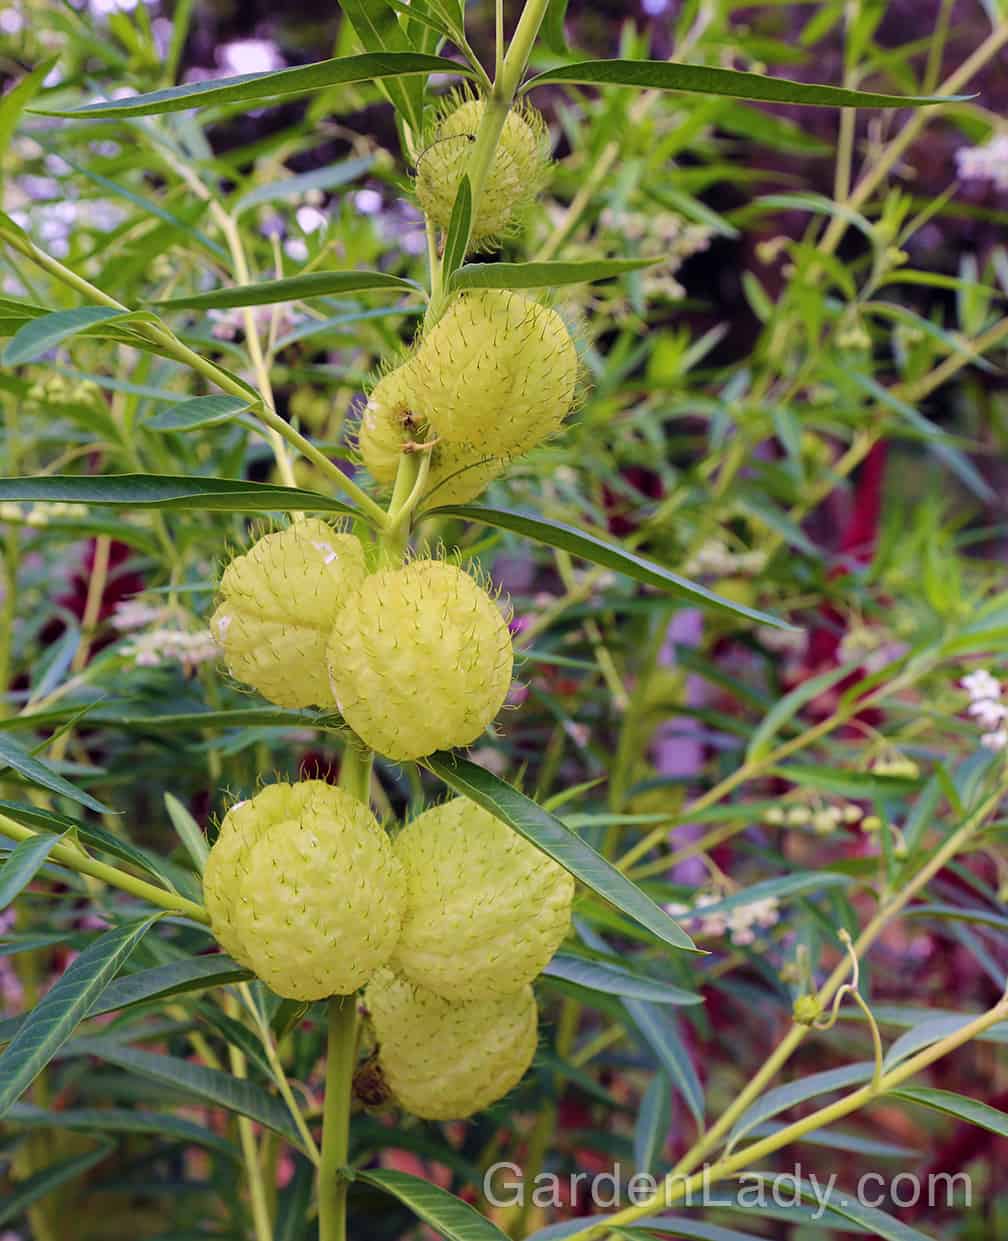 Hairy Balls and Pollinators…You Can Grow That!